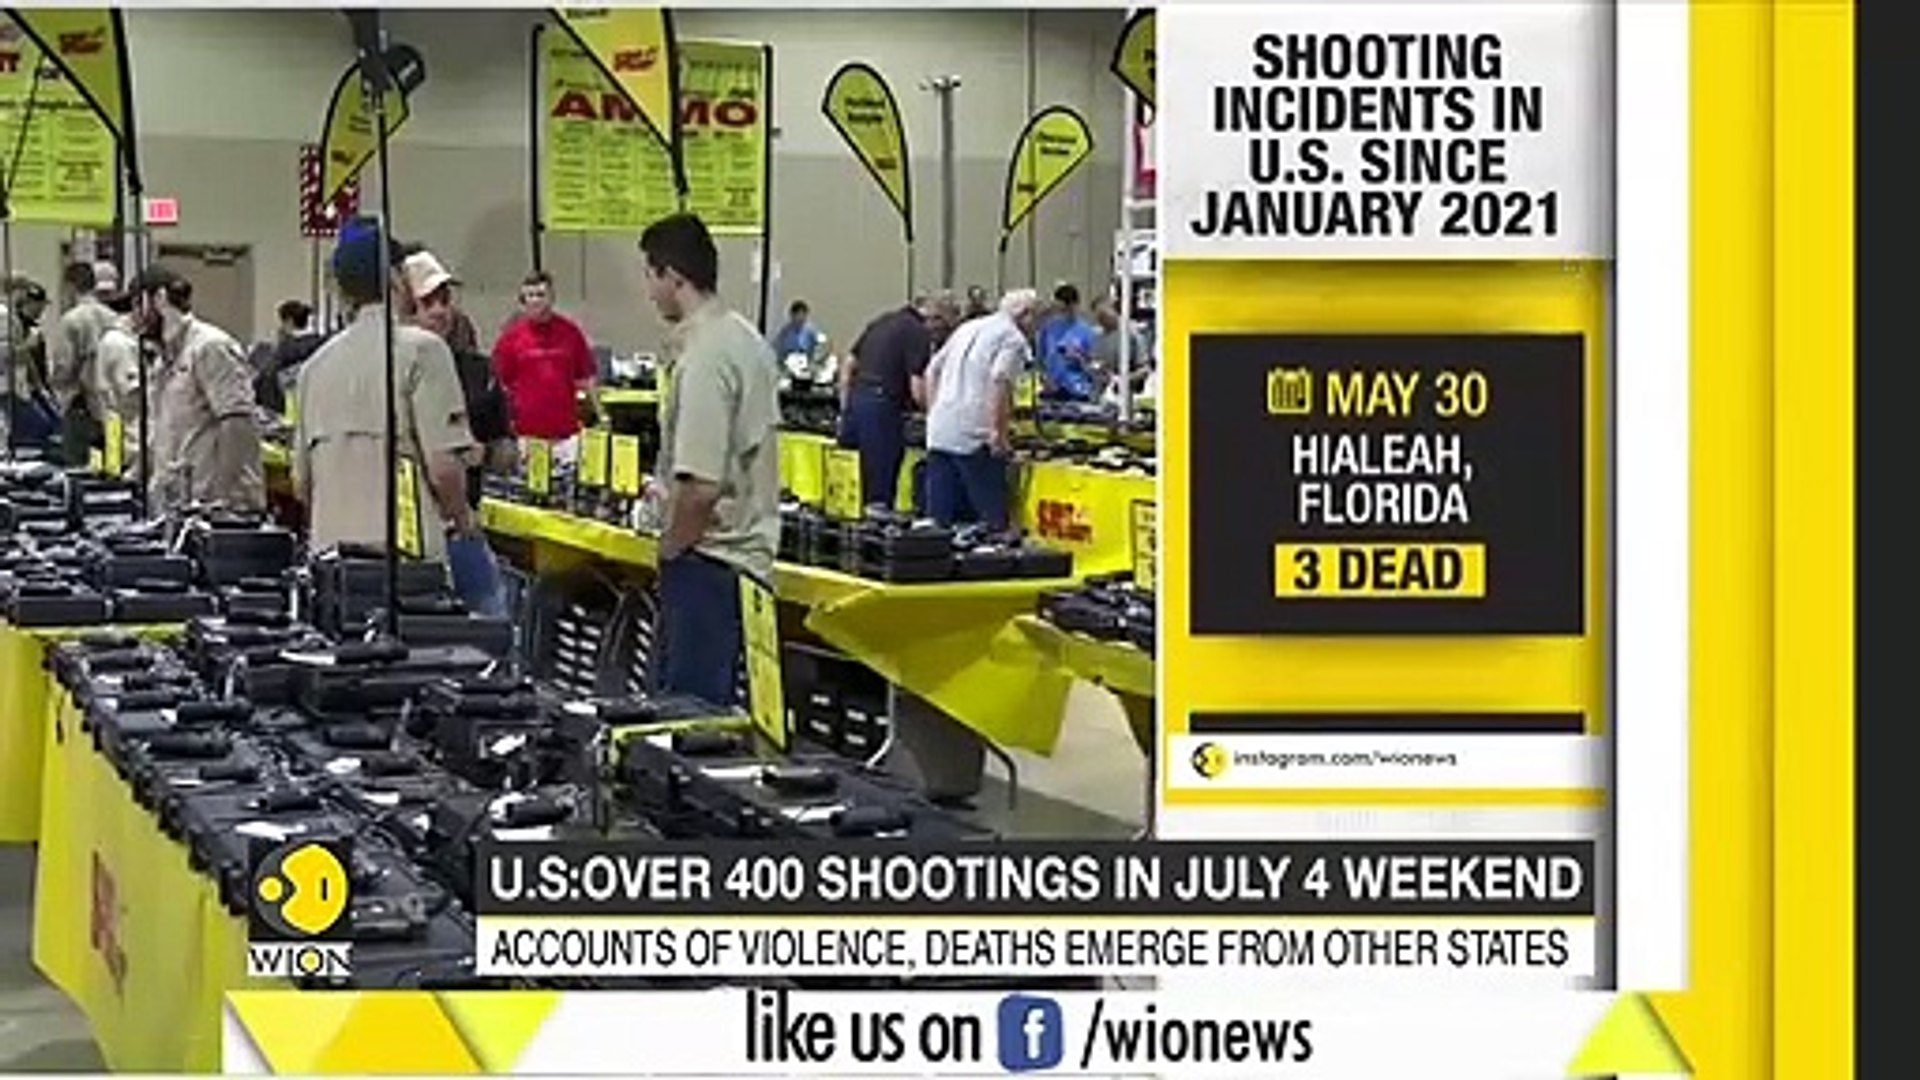 At least 150 people died in shootings across the US over Fourth of July weekend _Latest English News